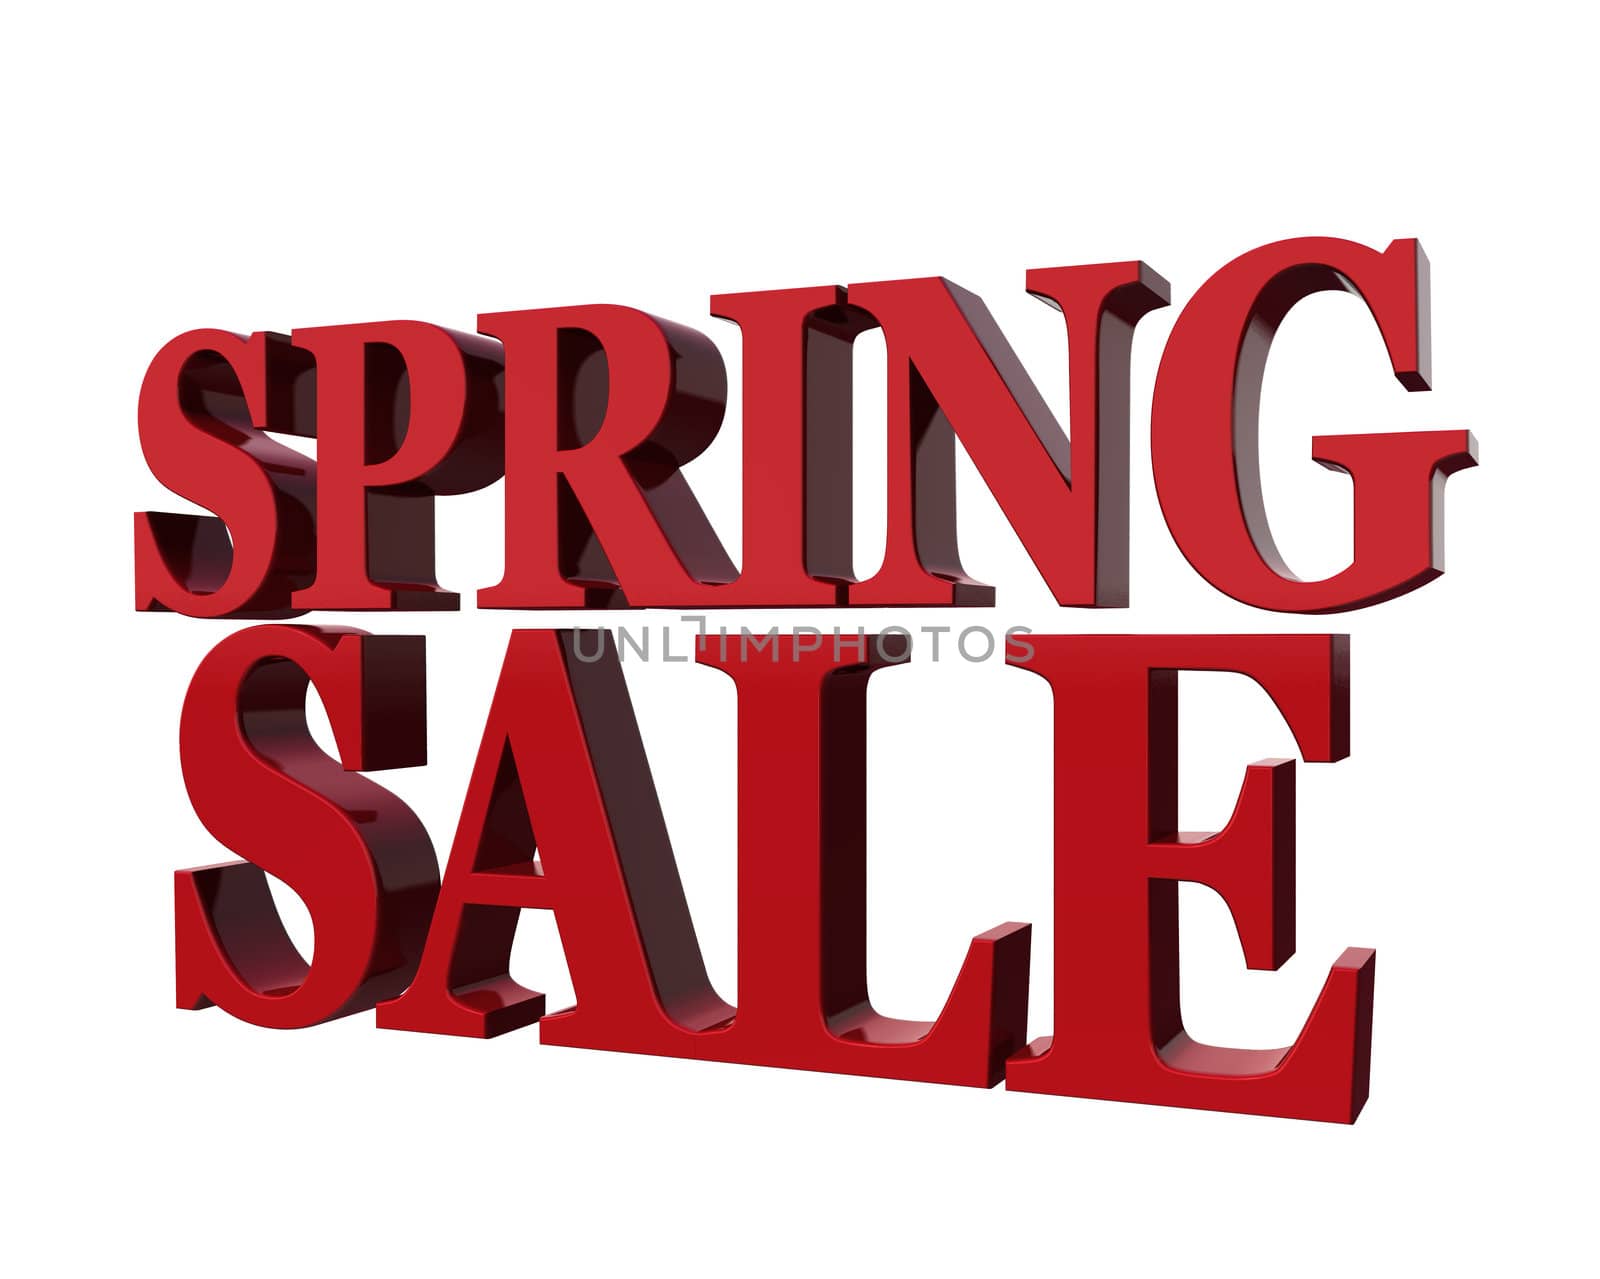 Spring sale. Promotional message in red isolated on a white background.